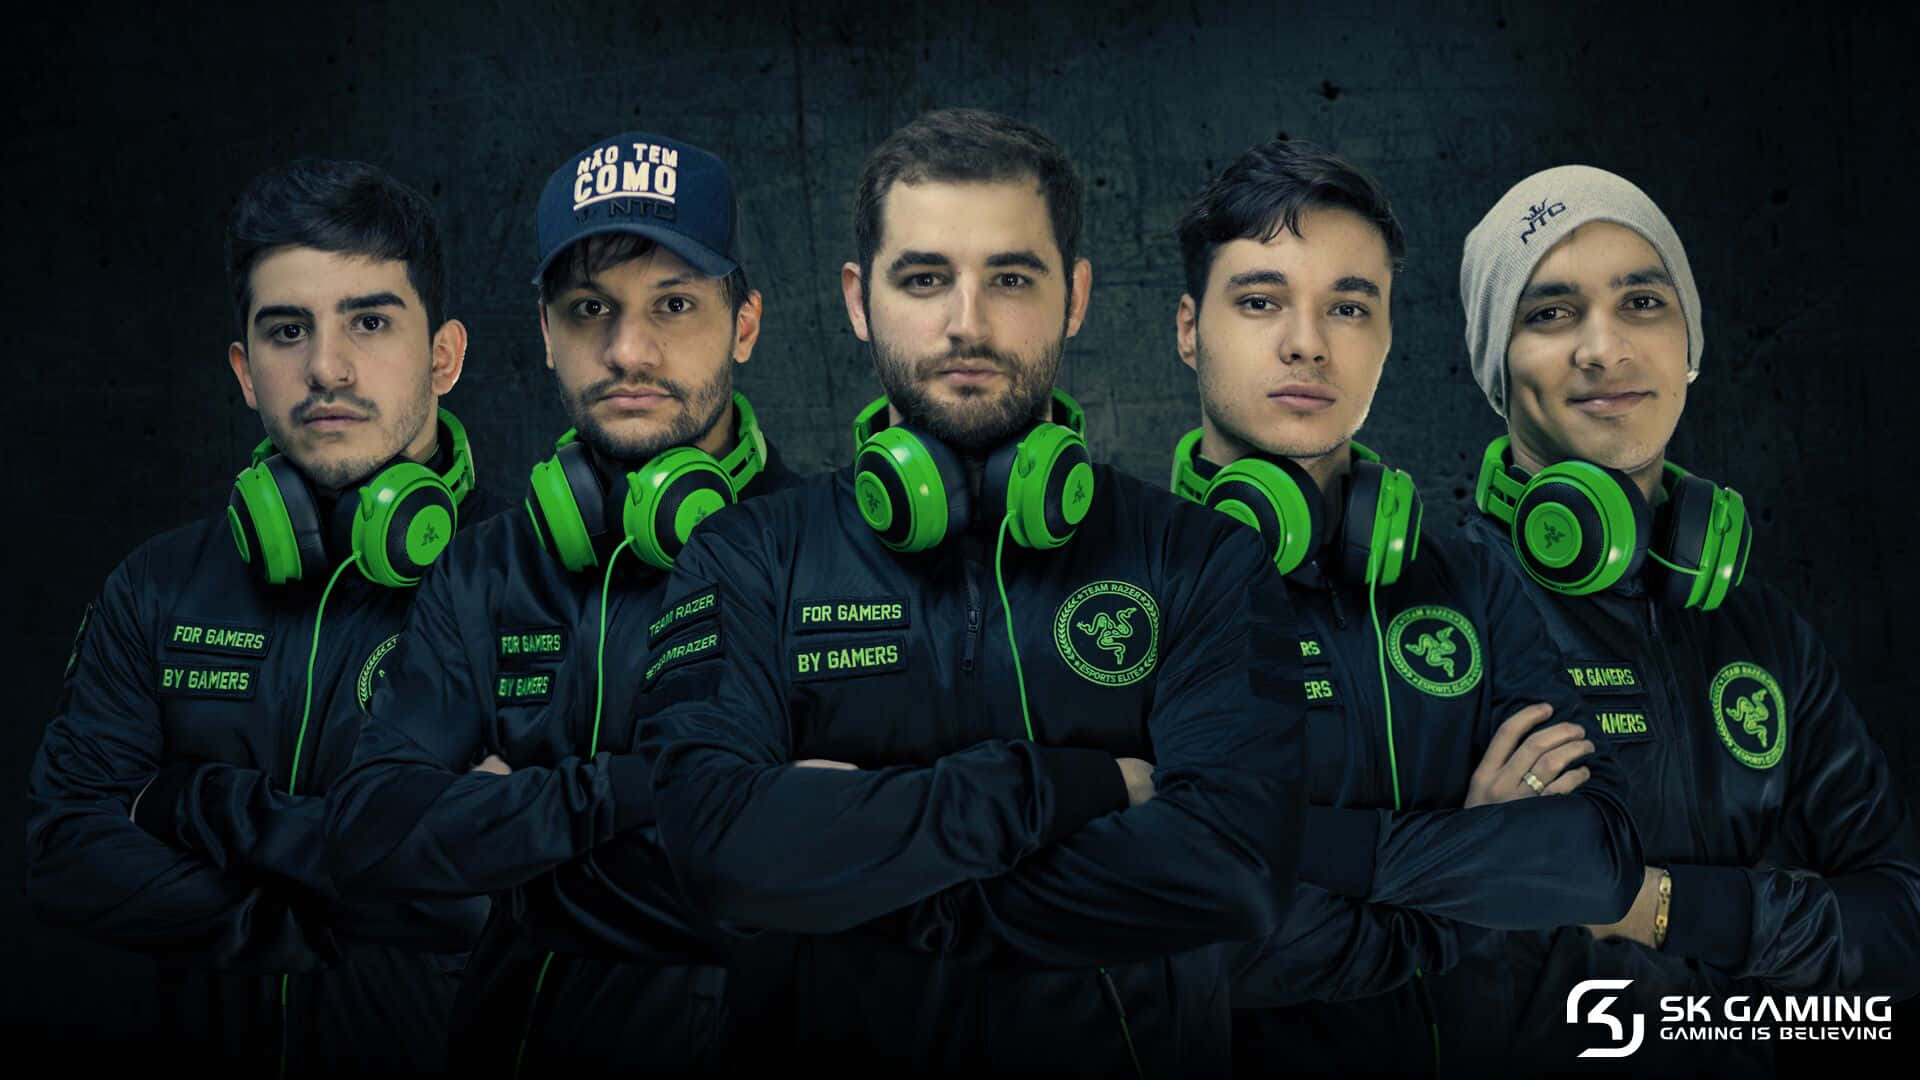 SK Gaming in action with the iconic logo on display Wallpaper